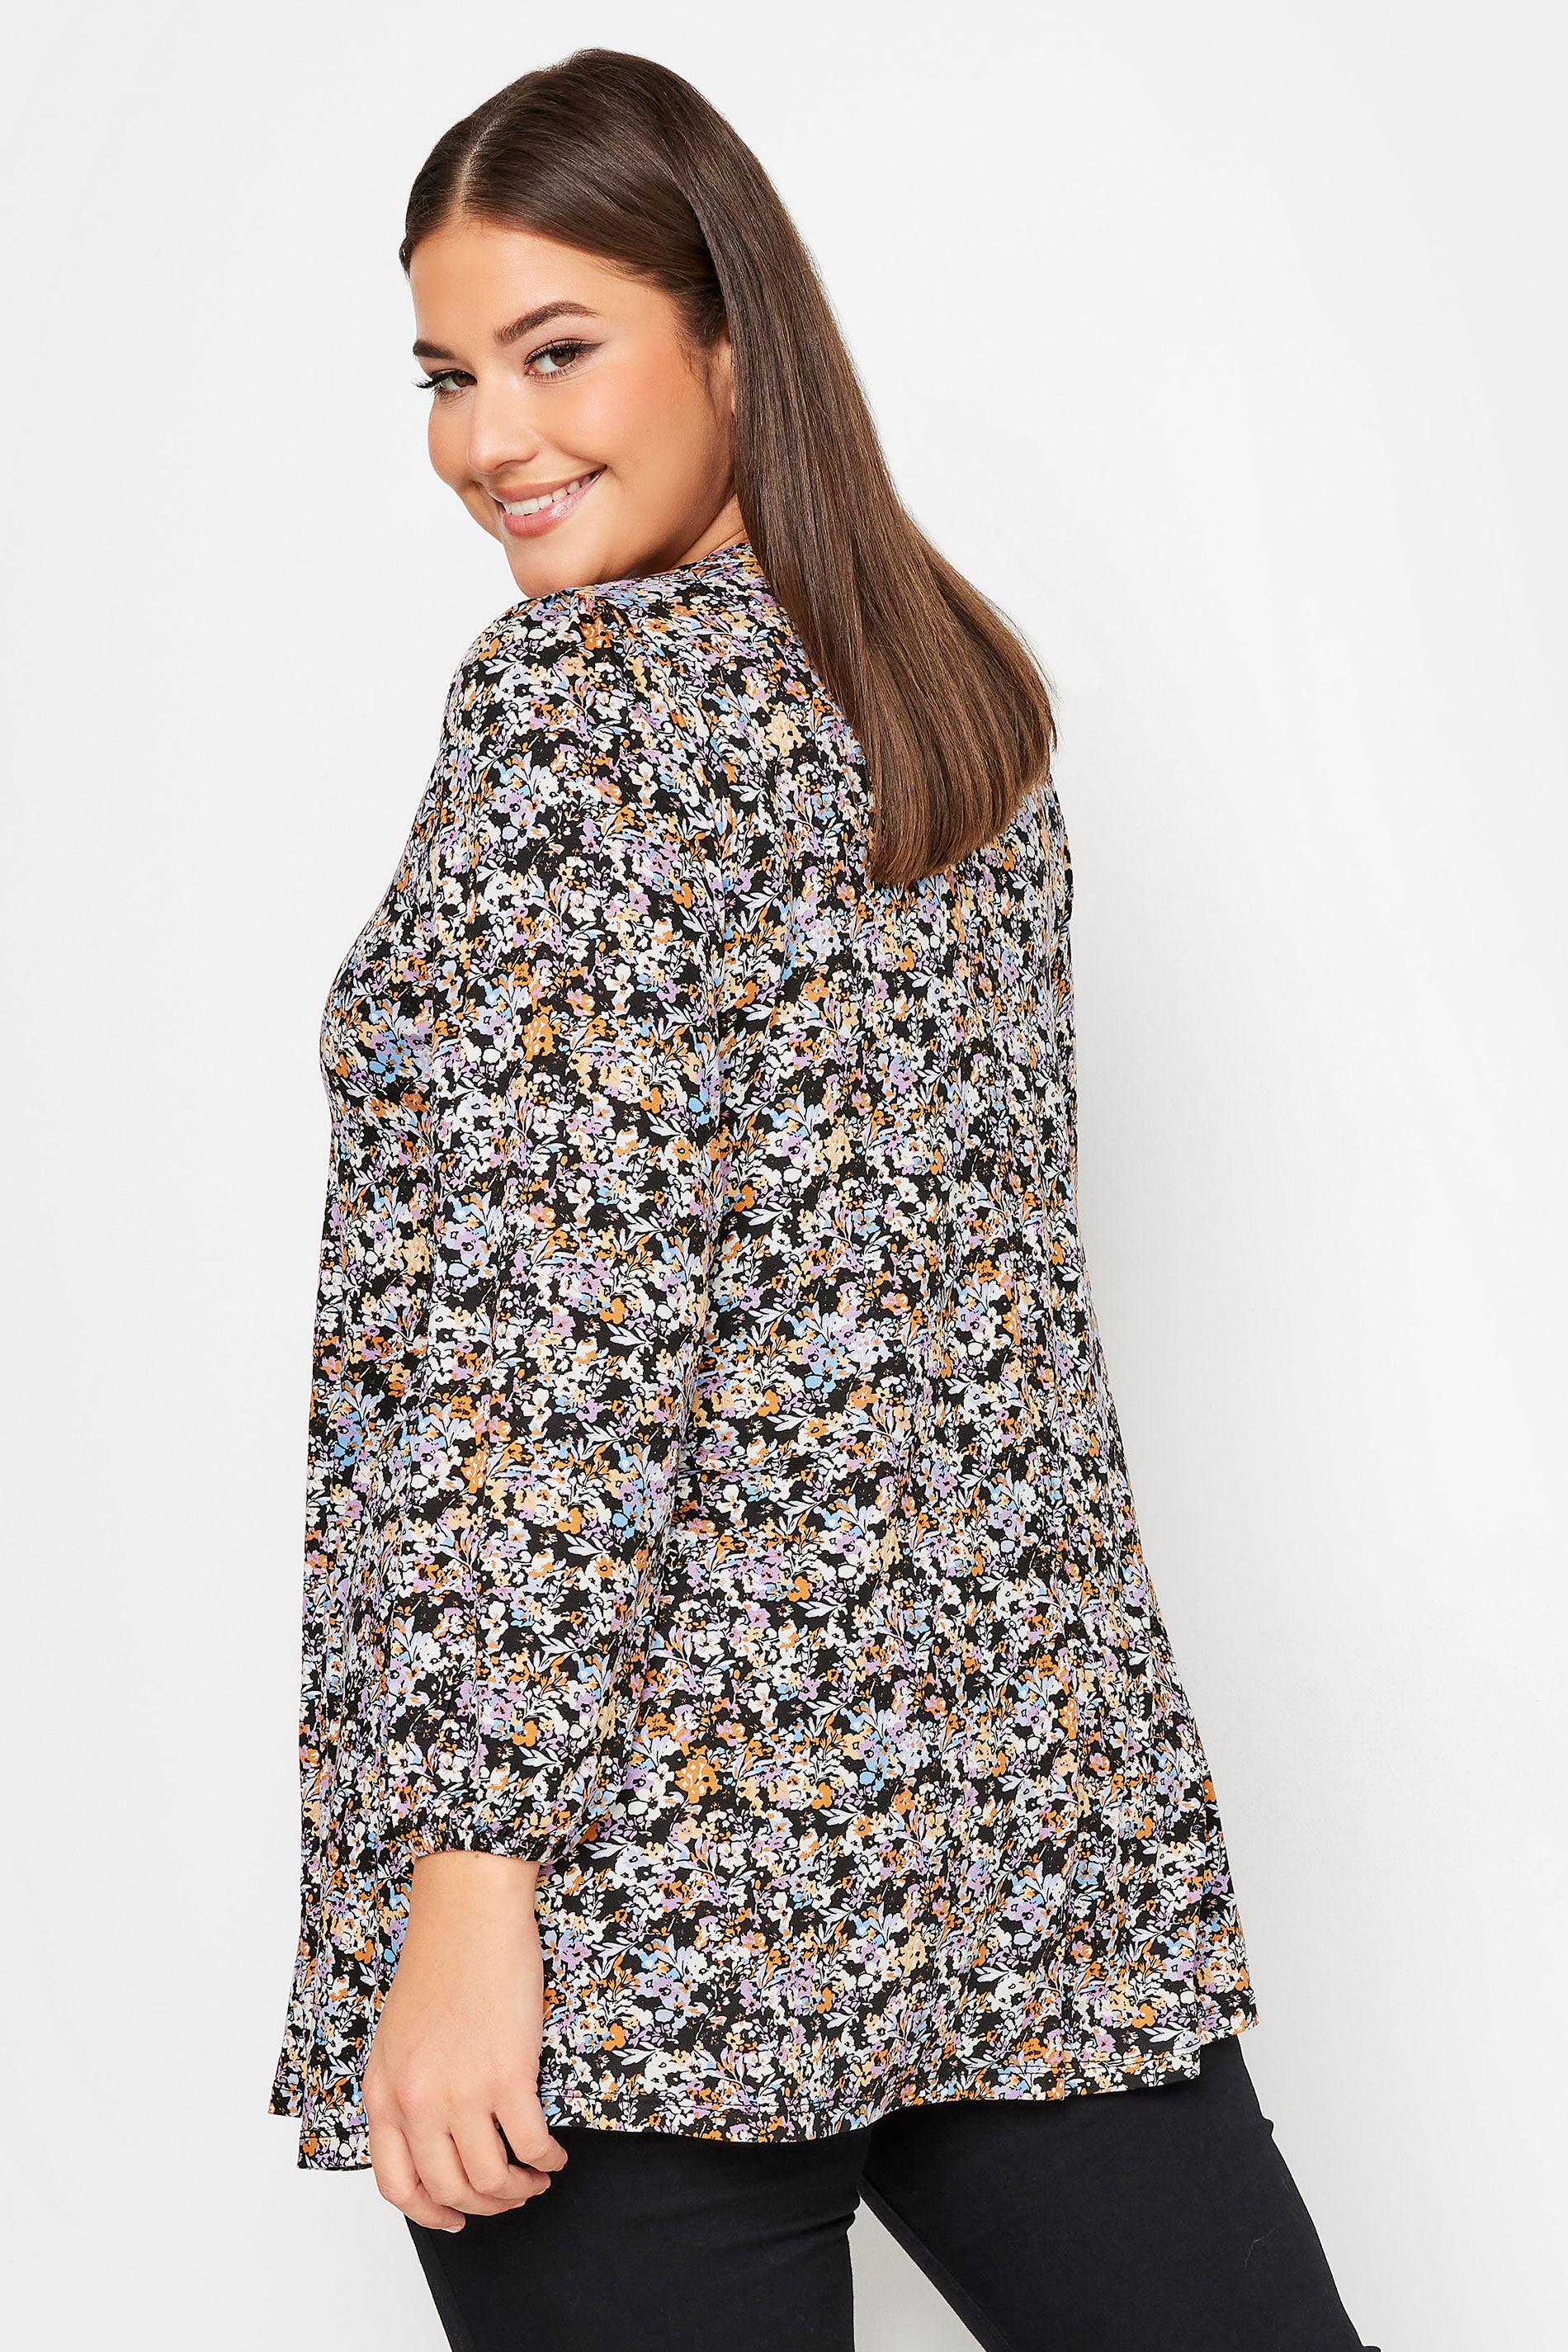 YOURS Plus Size Black Floral Print Long Sleeve Swing Top | Yours Clothing 3